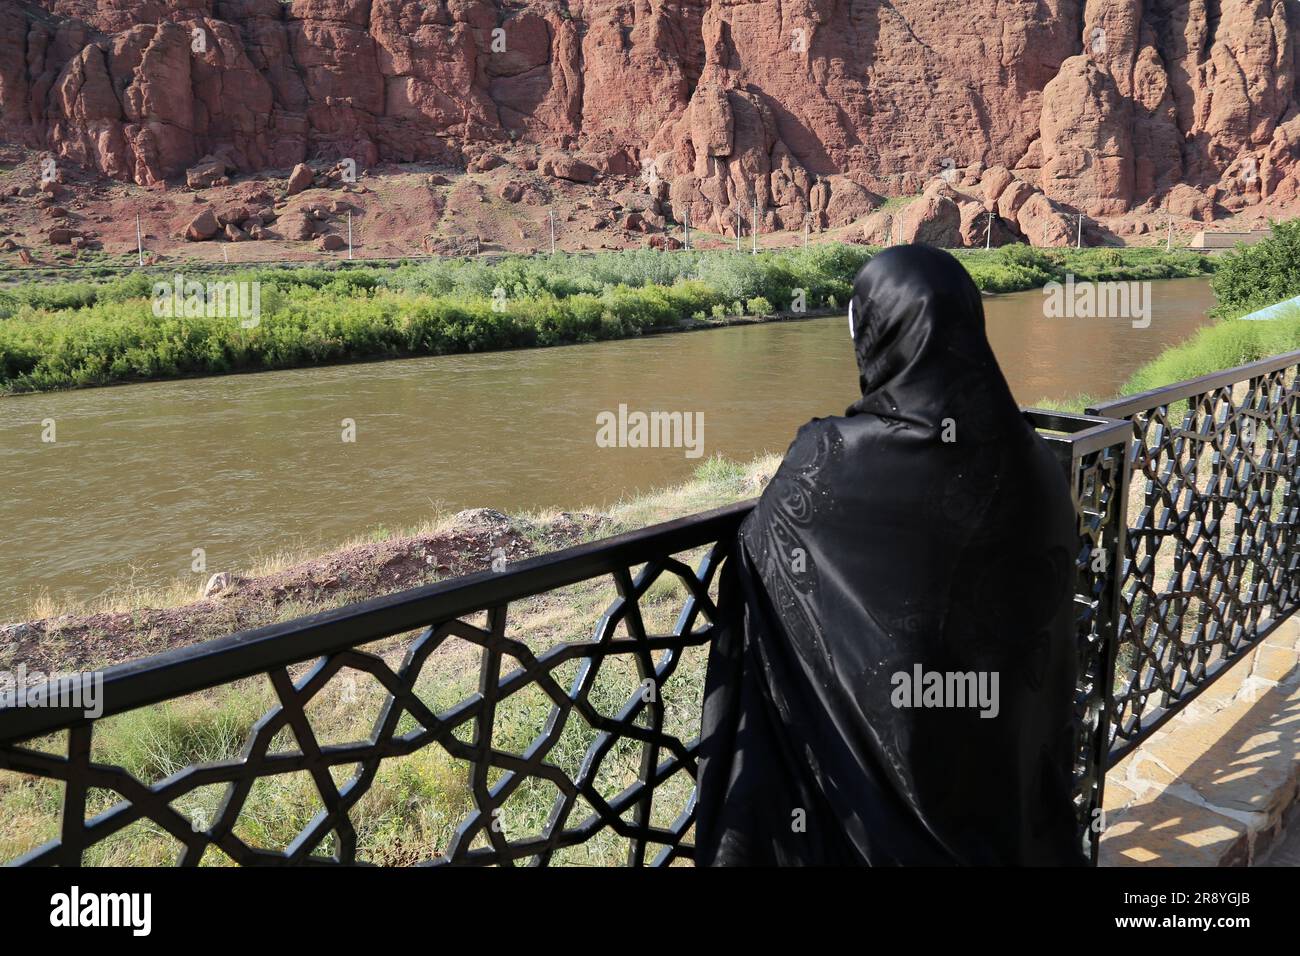 June 21, 2023, Jolfa, East Azerbaijan, Iran: A veiled woman in a black chador looks at the Aras River at the border between northwestern Iran and Azerbaijan. The Aras (the Araks, Arax, Araxes, or Araz) is a river in the Caucasus. It rises in eastern Turkey and flows along the borders between Turkey and Armenia, between Turkey and the Nakhchivan exclave of Azerbaijan, between Iran and both Azerbaijan and Armenia, and, finally, through Azerbaijan where it flows into the Kura River. It drains the south side of the Lesser Caucasus Mountains while the Kura drains the north side of the Lesser Caucas Stock Photo